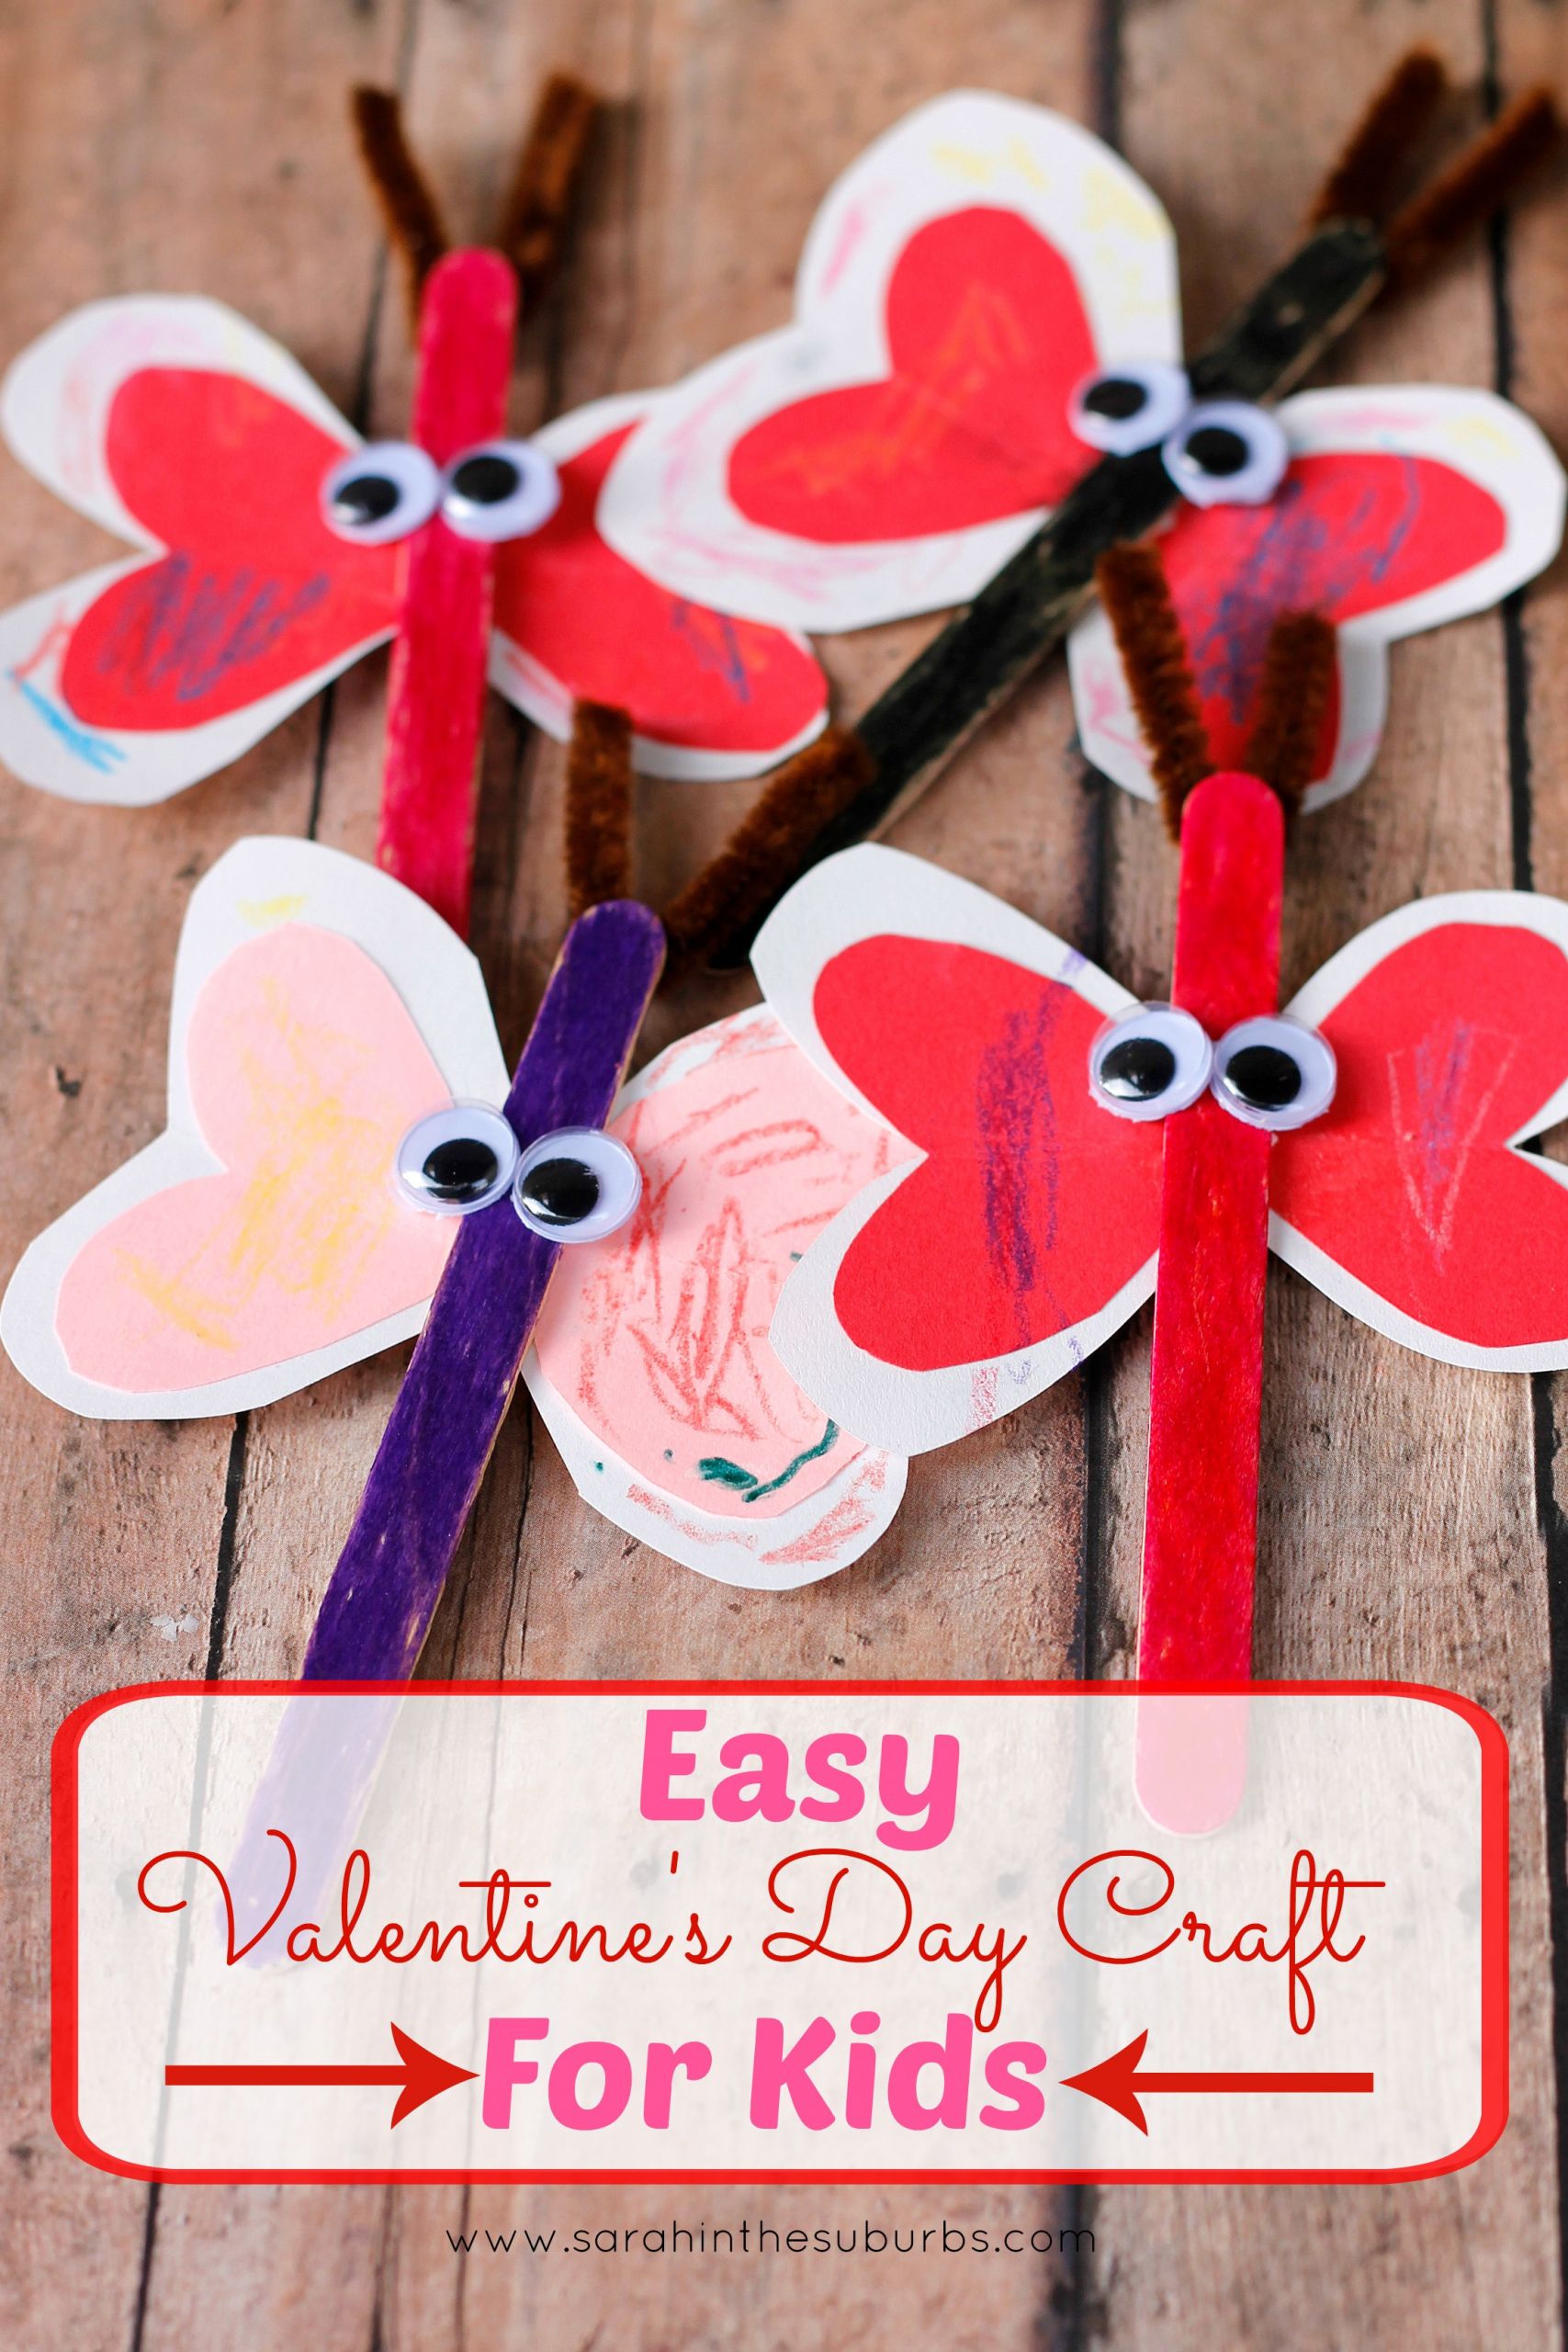 Simple Crafts For Toddlers
 Love Bug Valentine s Day Craft for Kids Sarah in the Suburbs